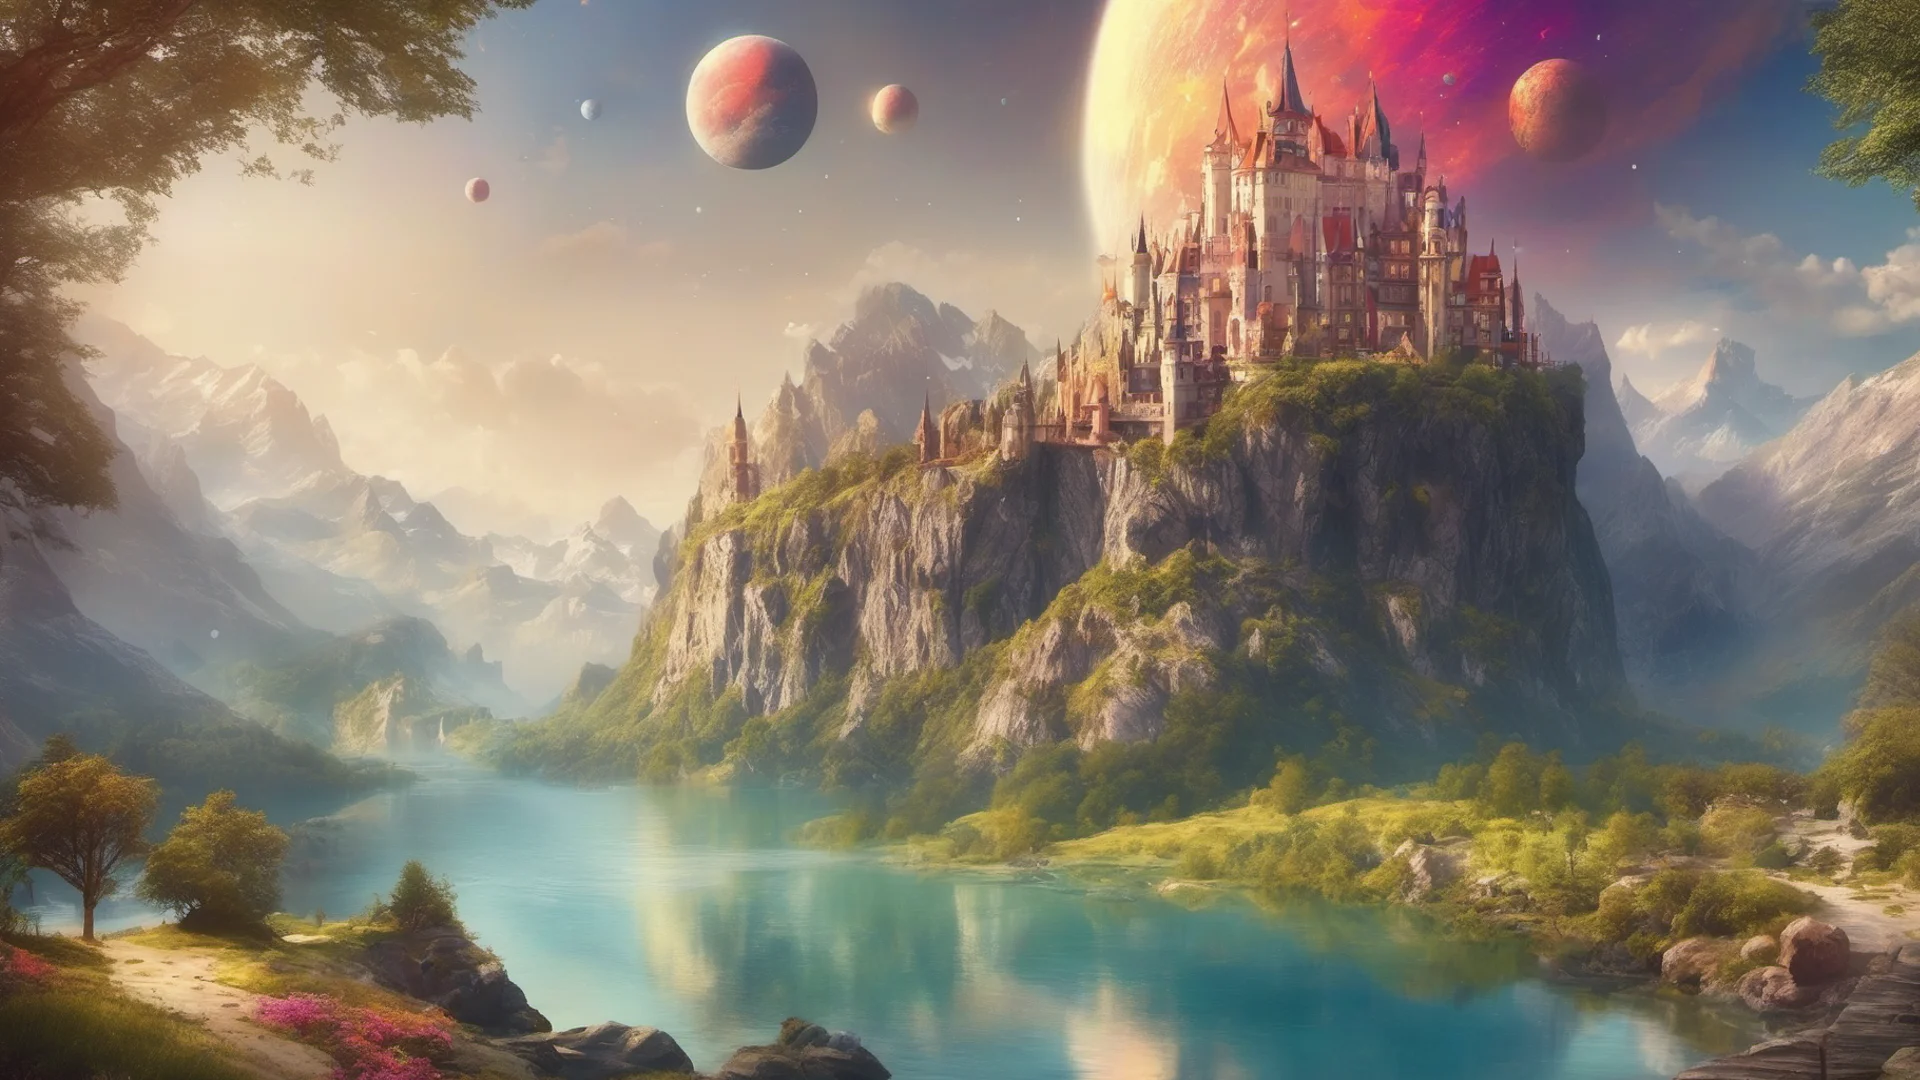 beautiful environment castle on mountains with lakes colorful planets confident engaging wow artstation art 3 wide